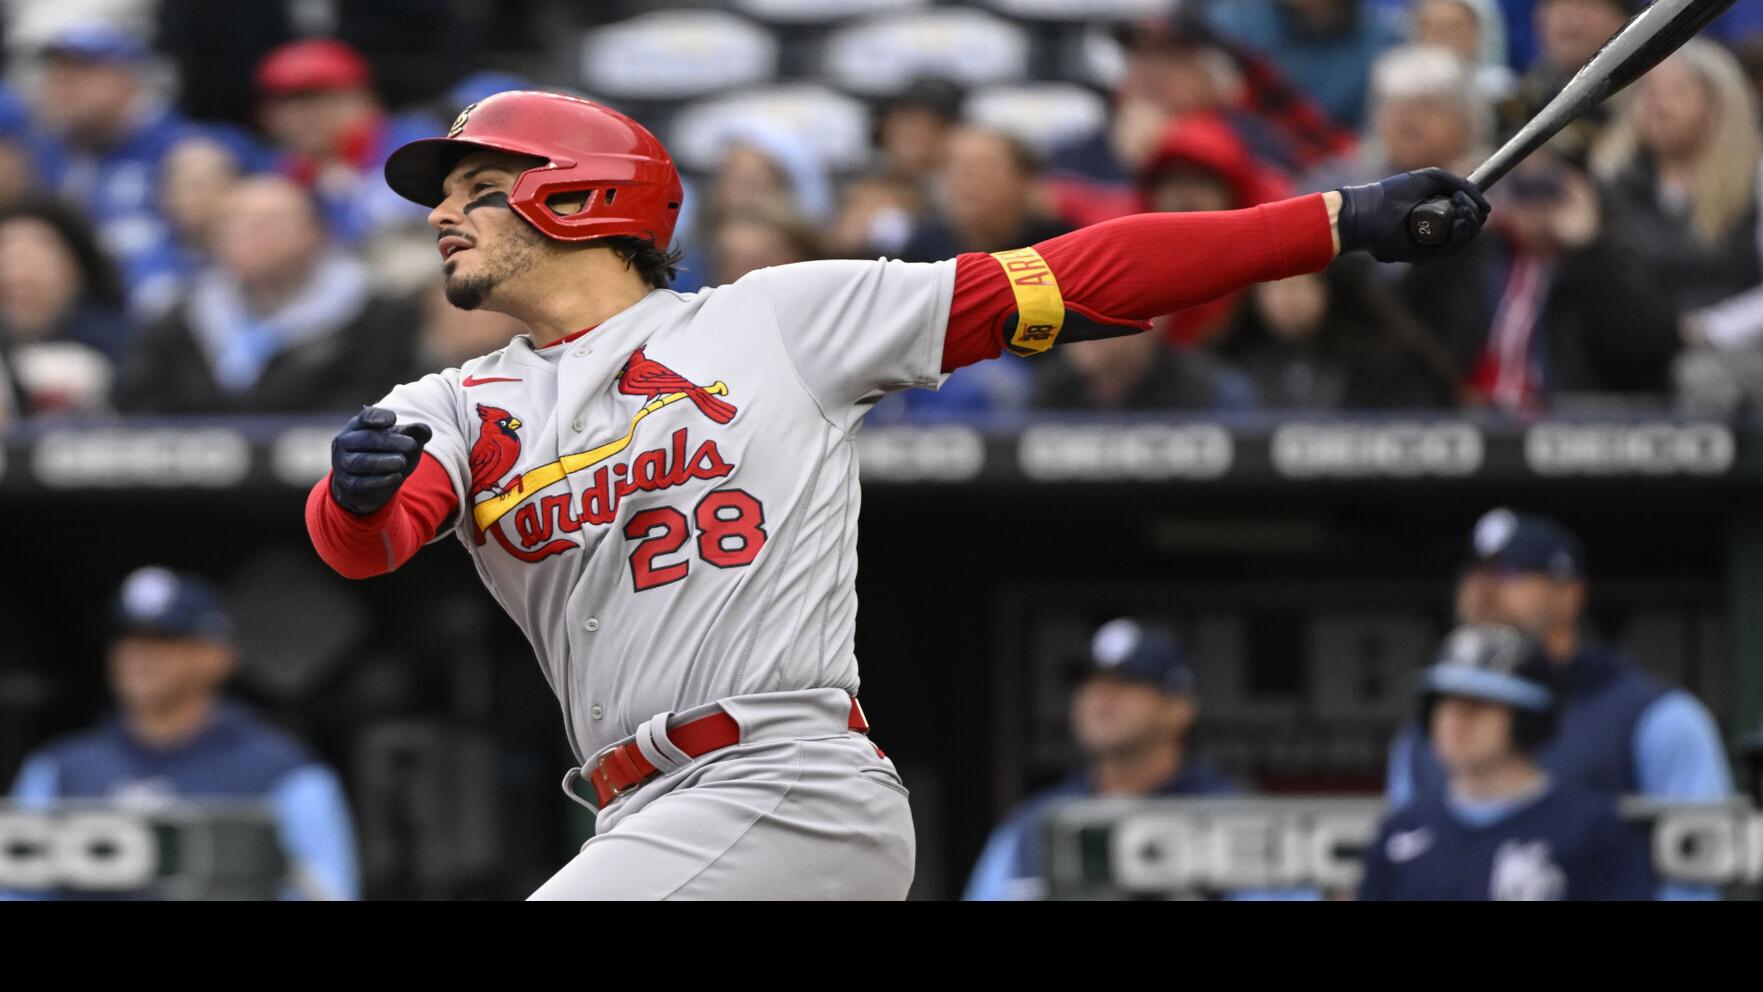 Arenado stakes Wainwright; Cardinals ace flushes Royals on one hit for seven innings